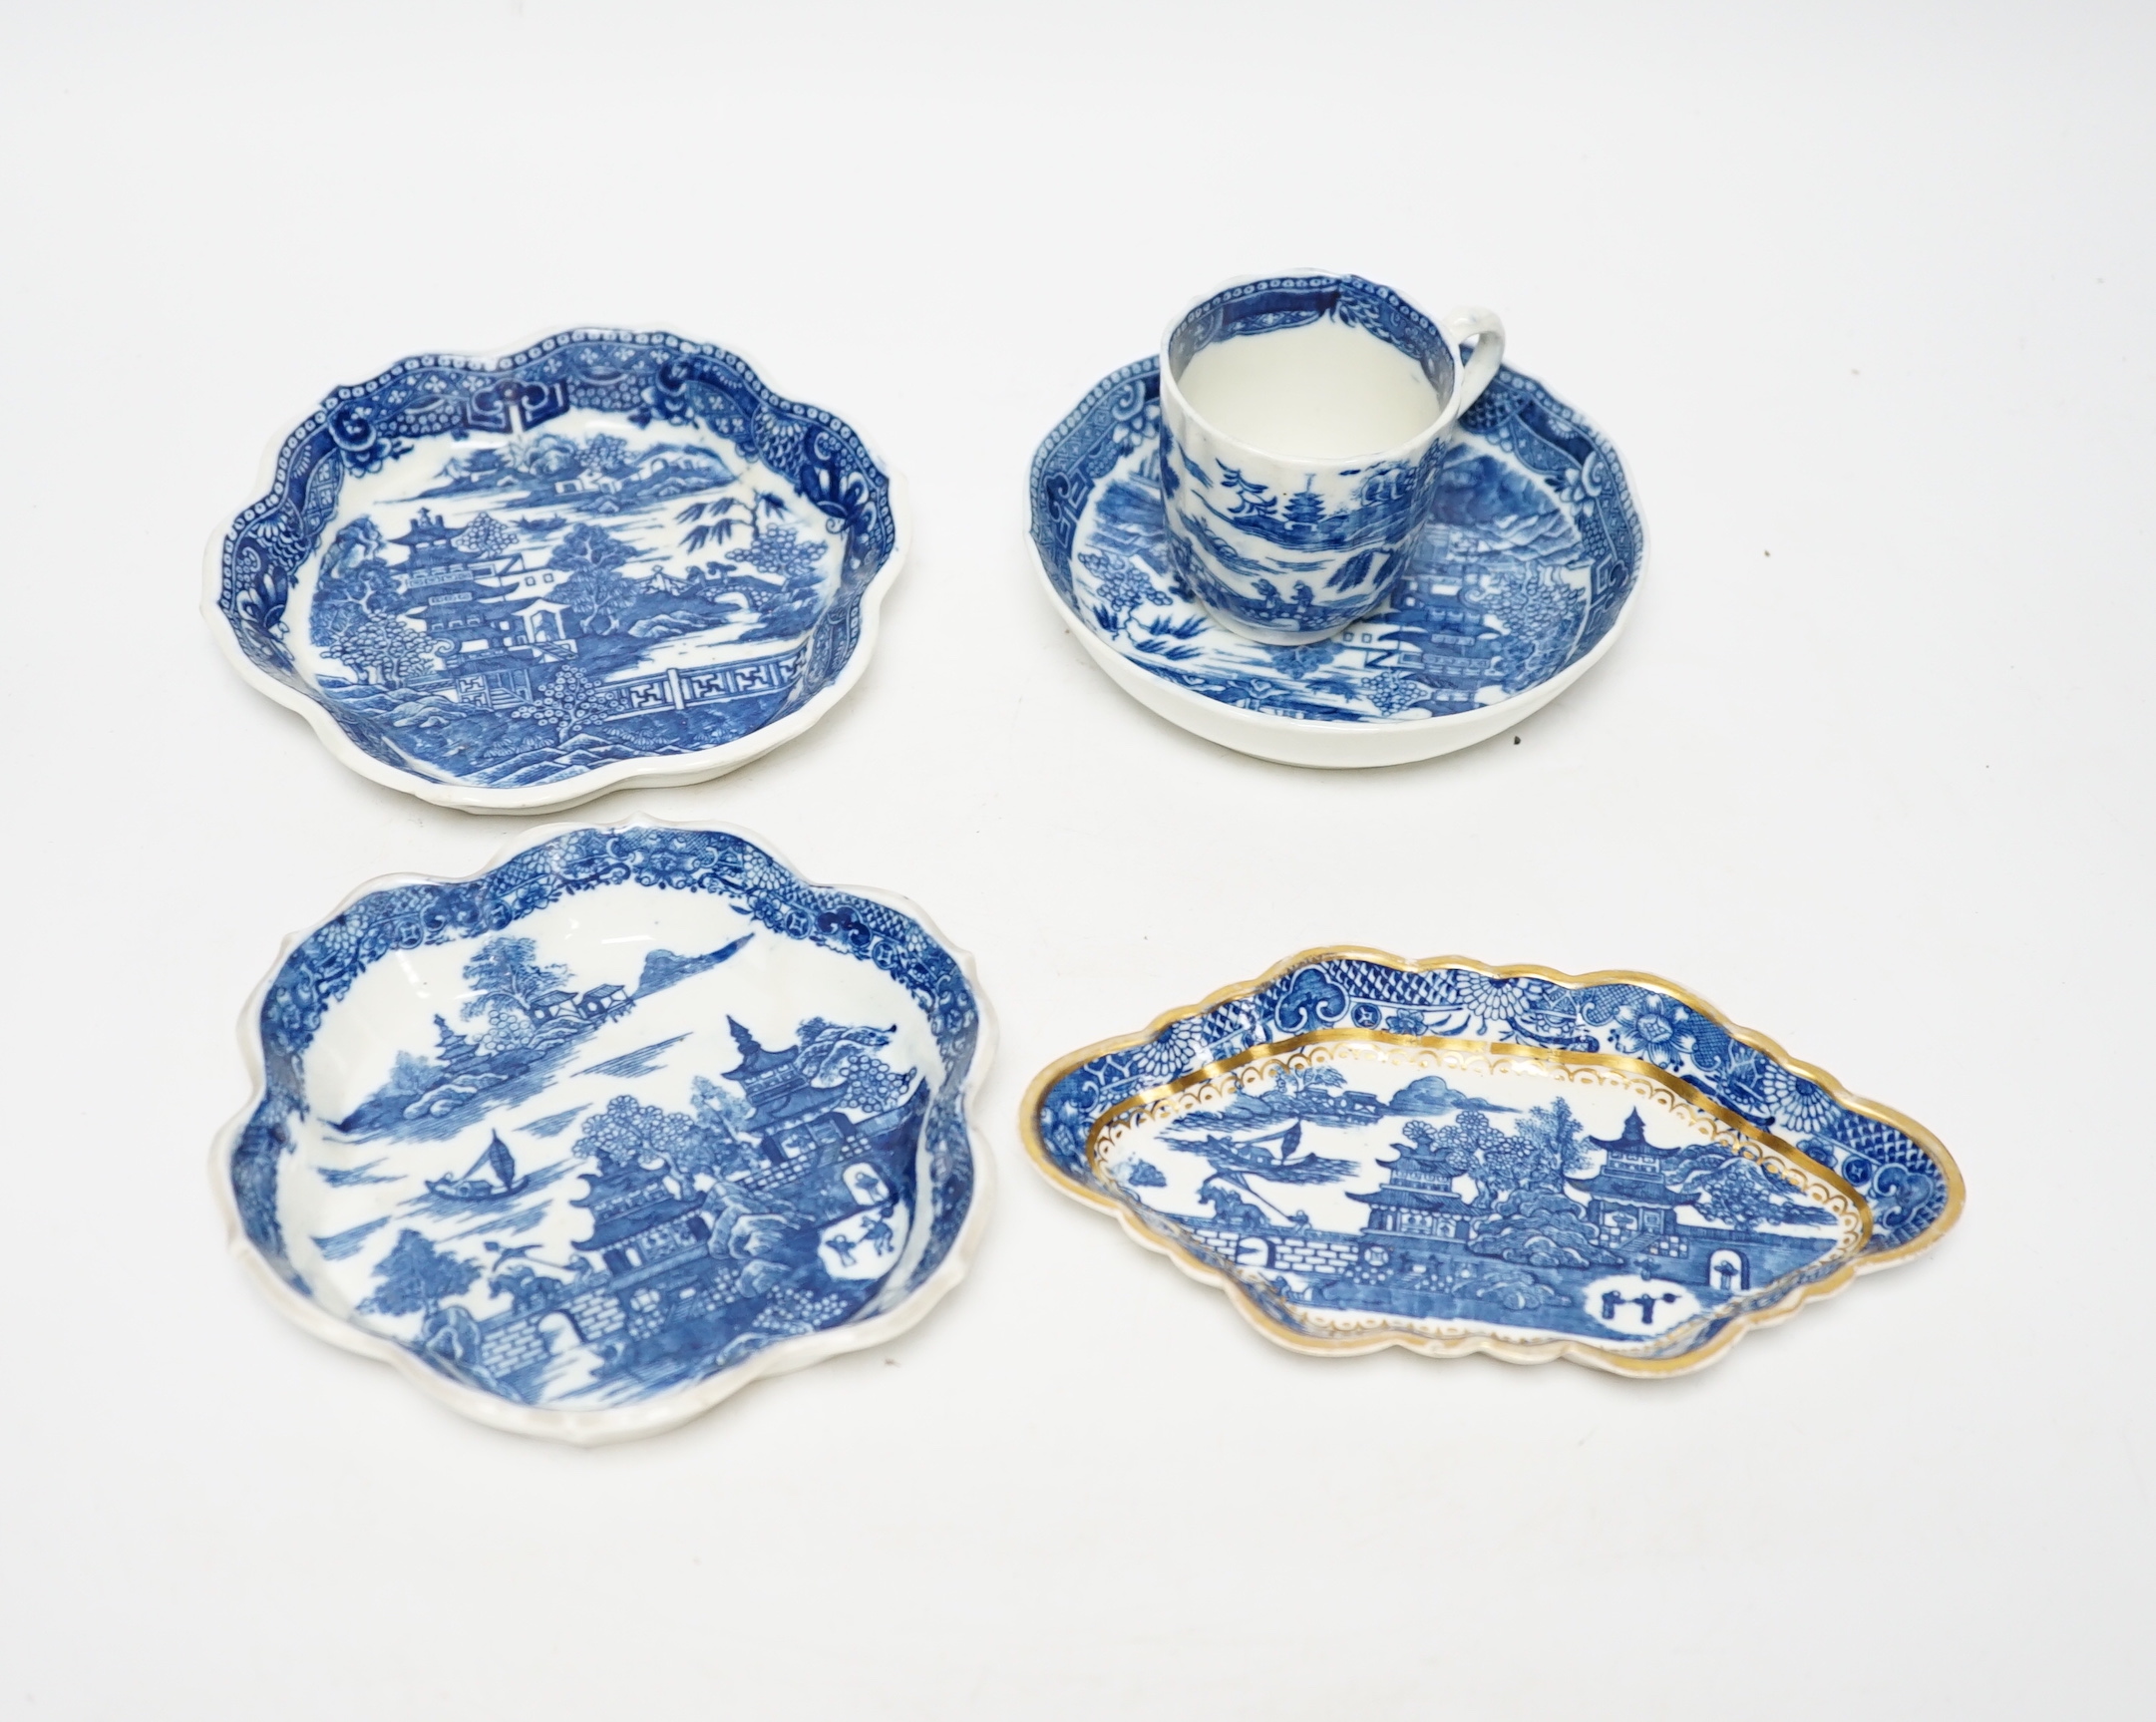 A group of Caughley pagoda pattern table wares, late 18th century, including two teapot stands, a coffee cup and saucer and a spoon tray